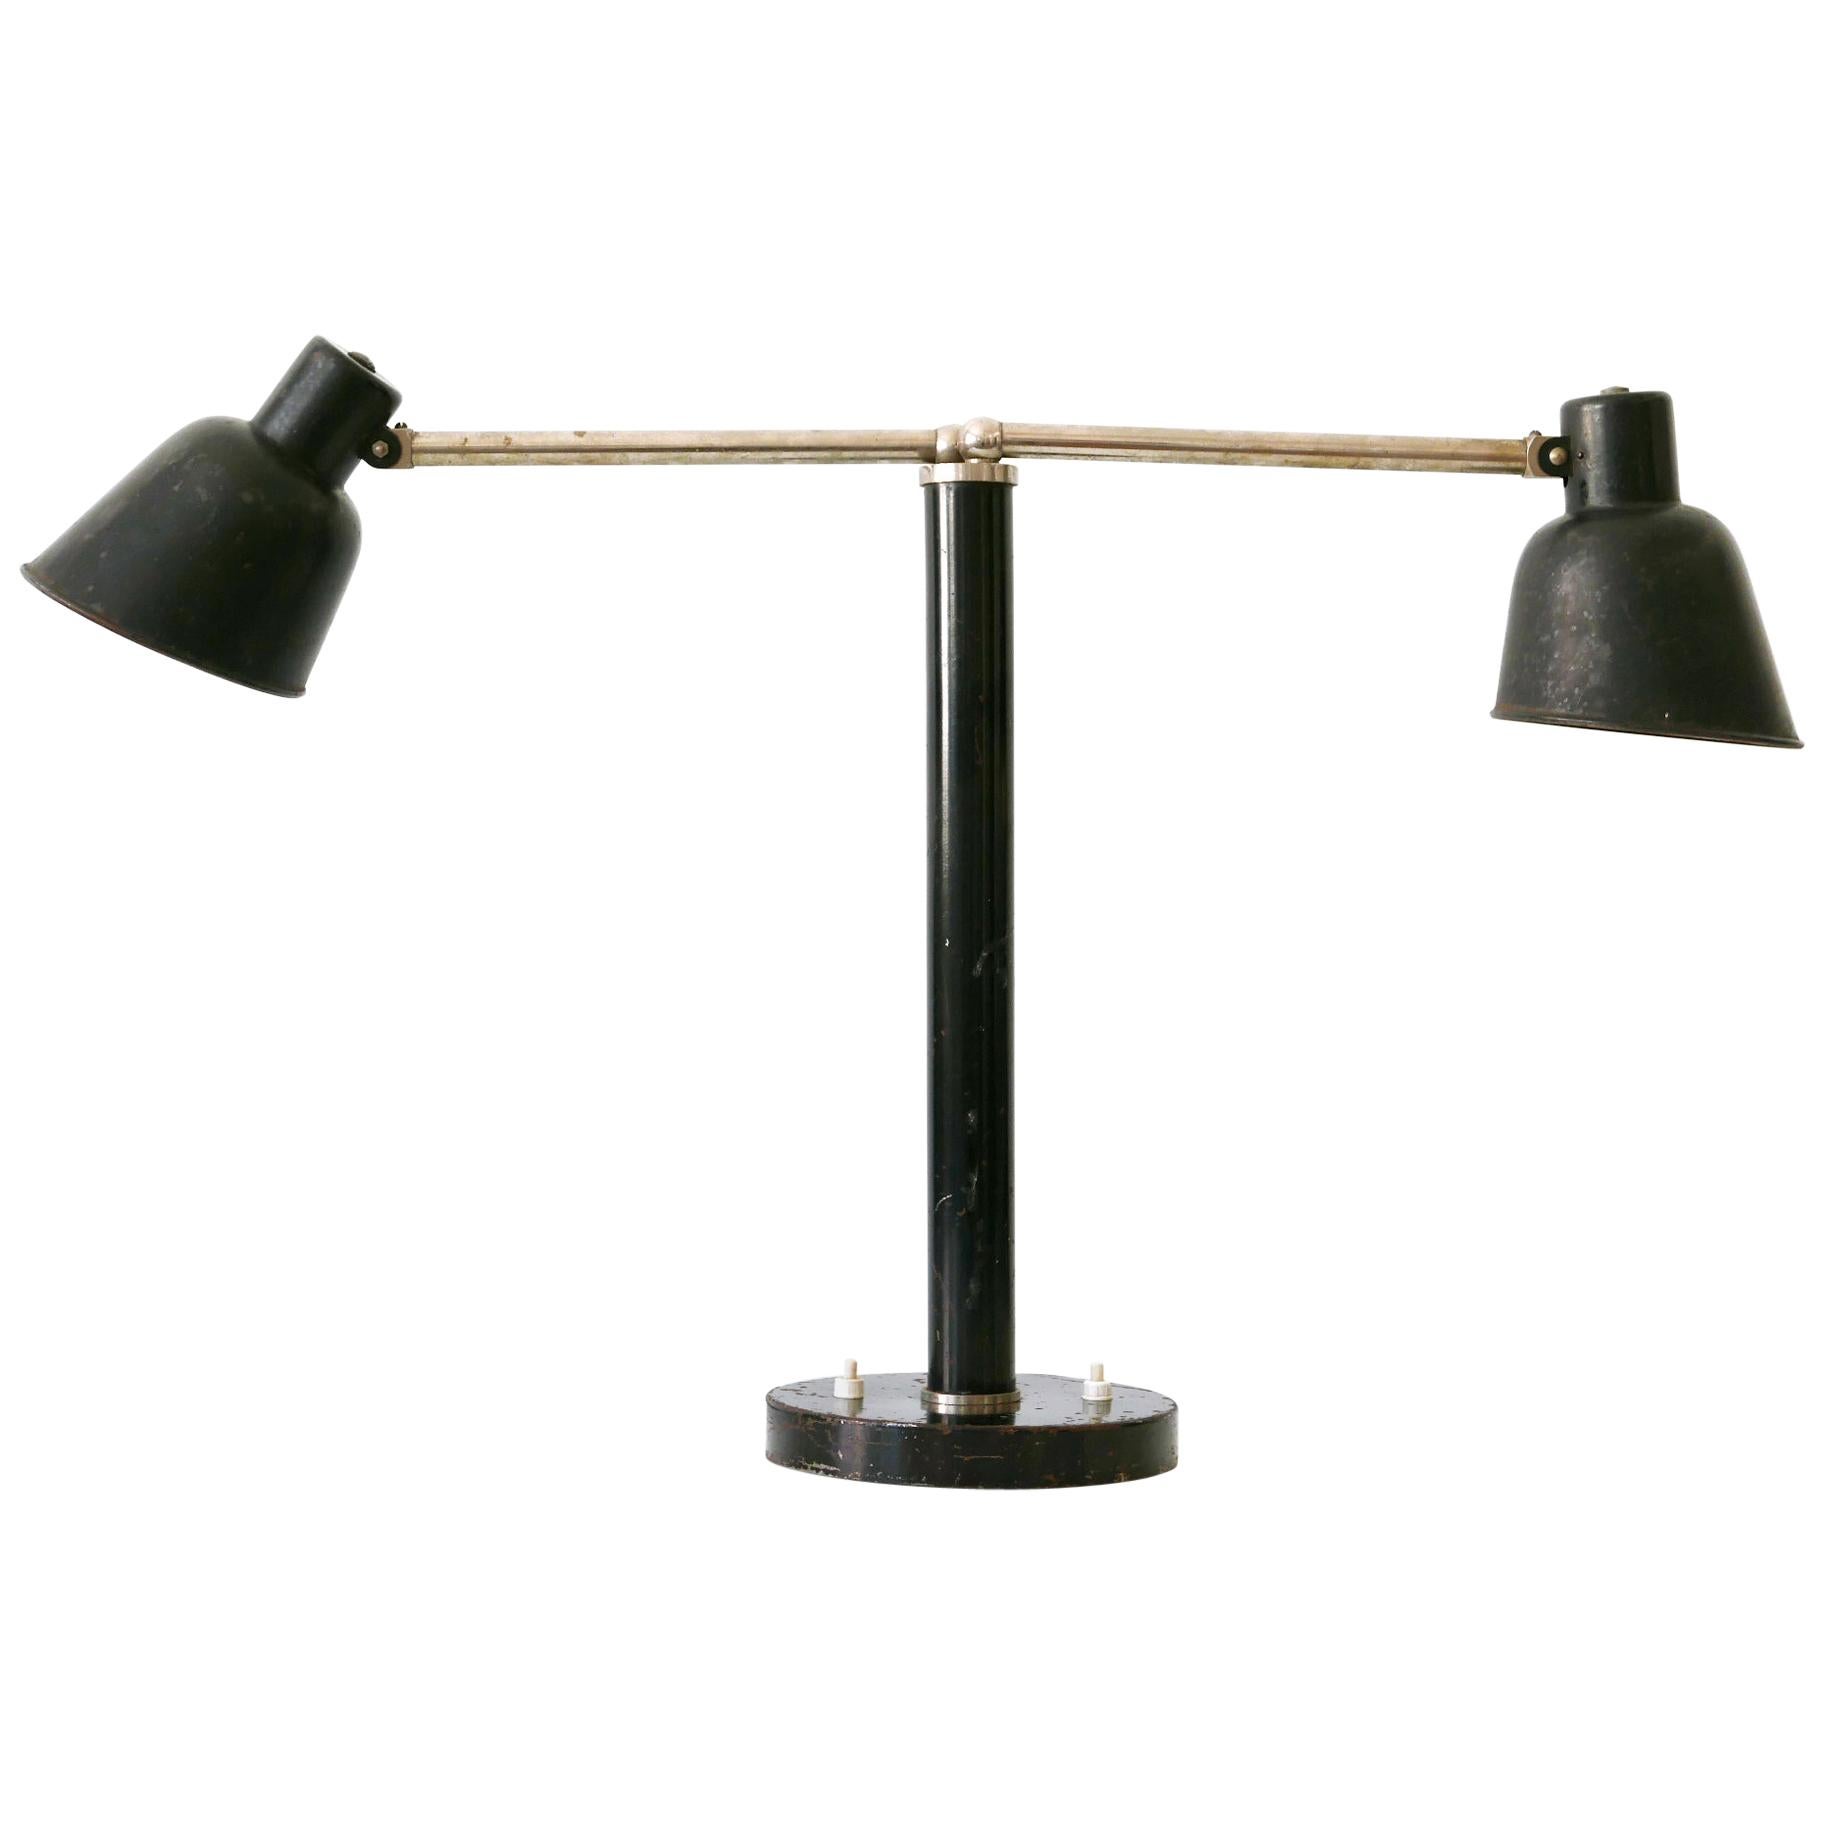 Rare Two-Armed Bauhaus Table Lamp by Christian Dell for Bünte & Remmler 1930s